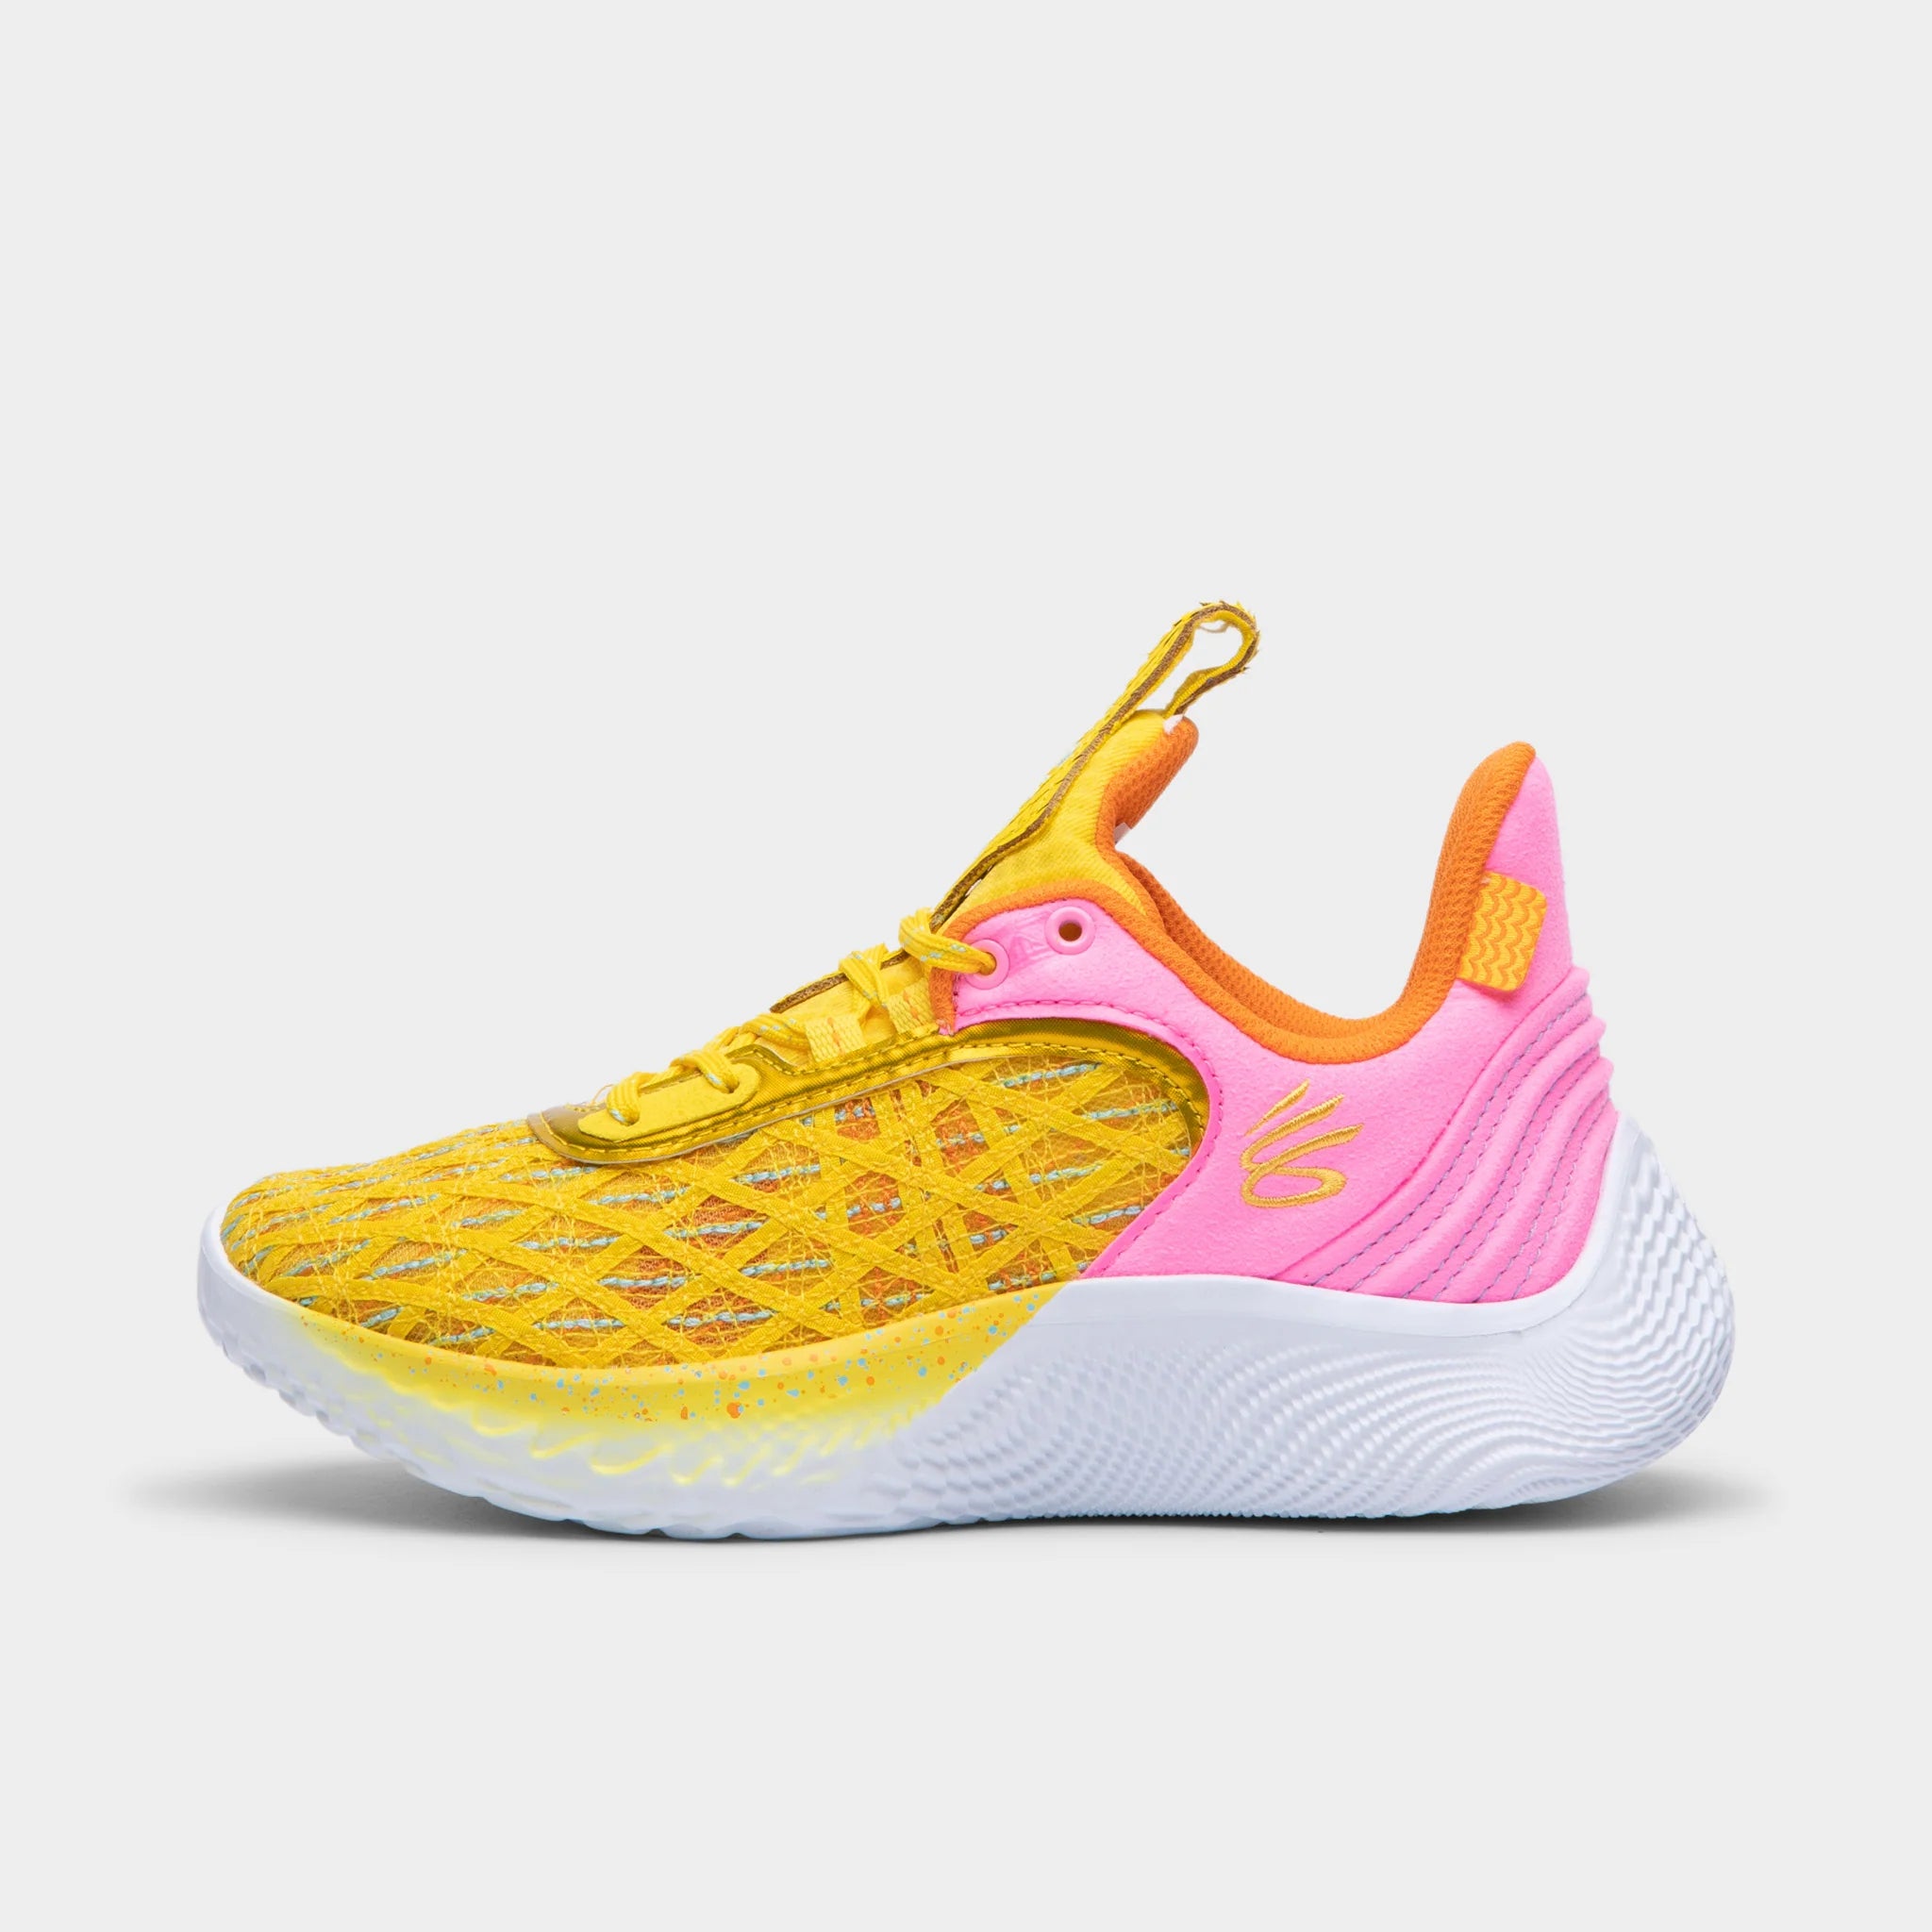 Under Armour Curry 9 generation yellow & Pink